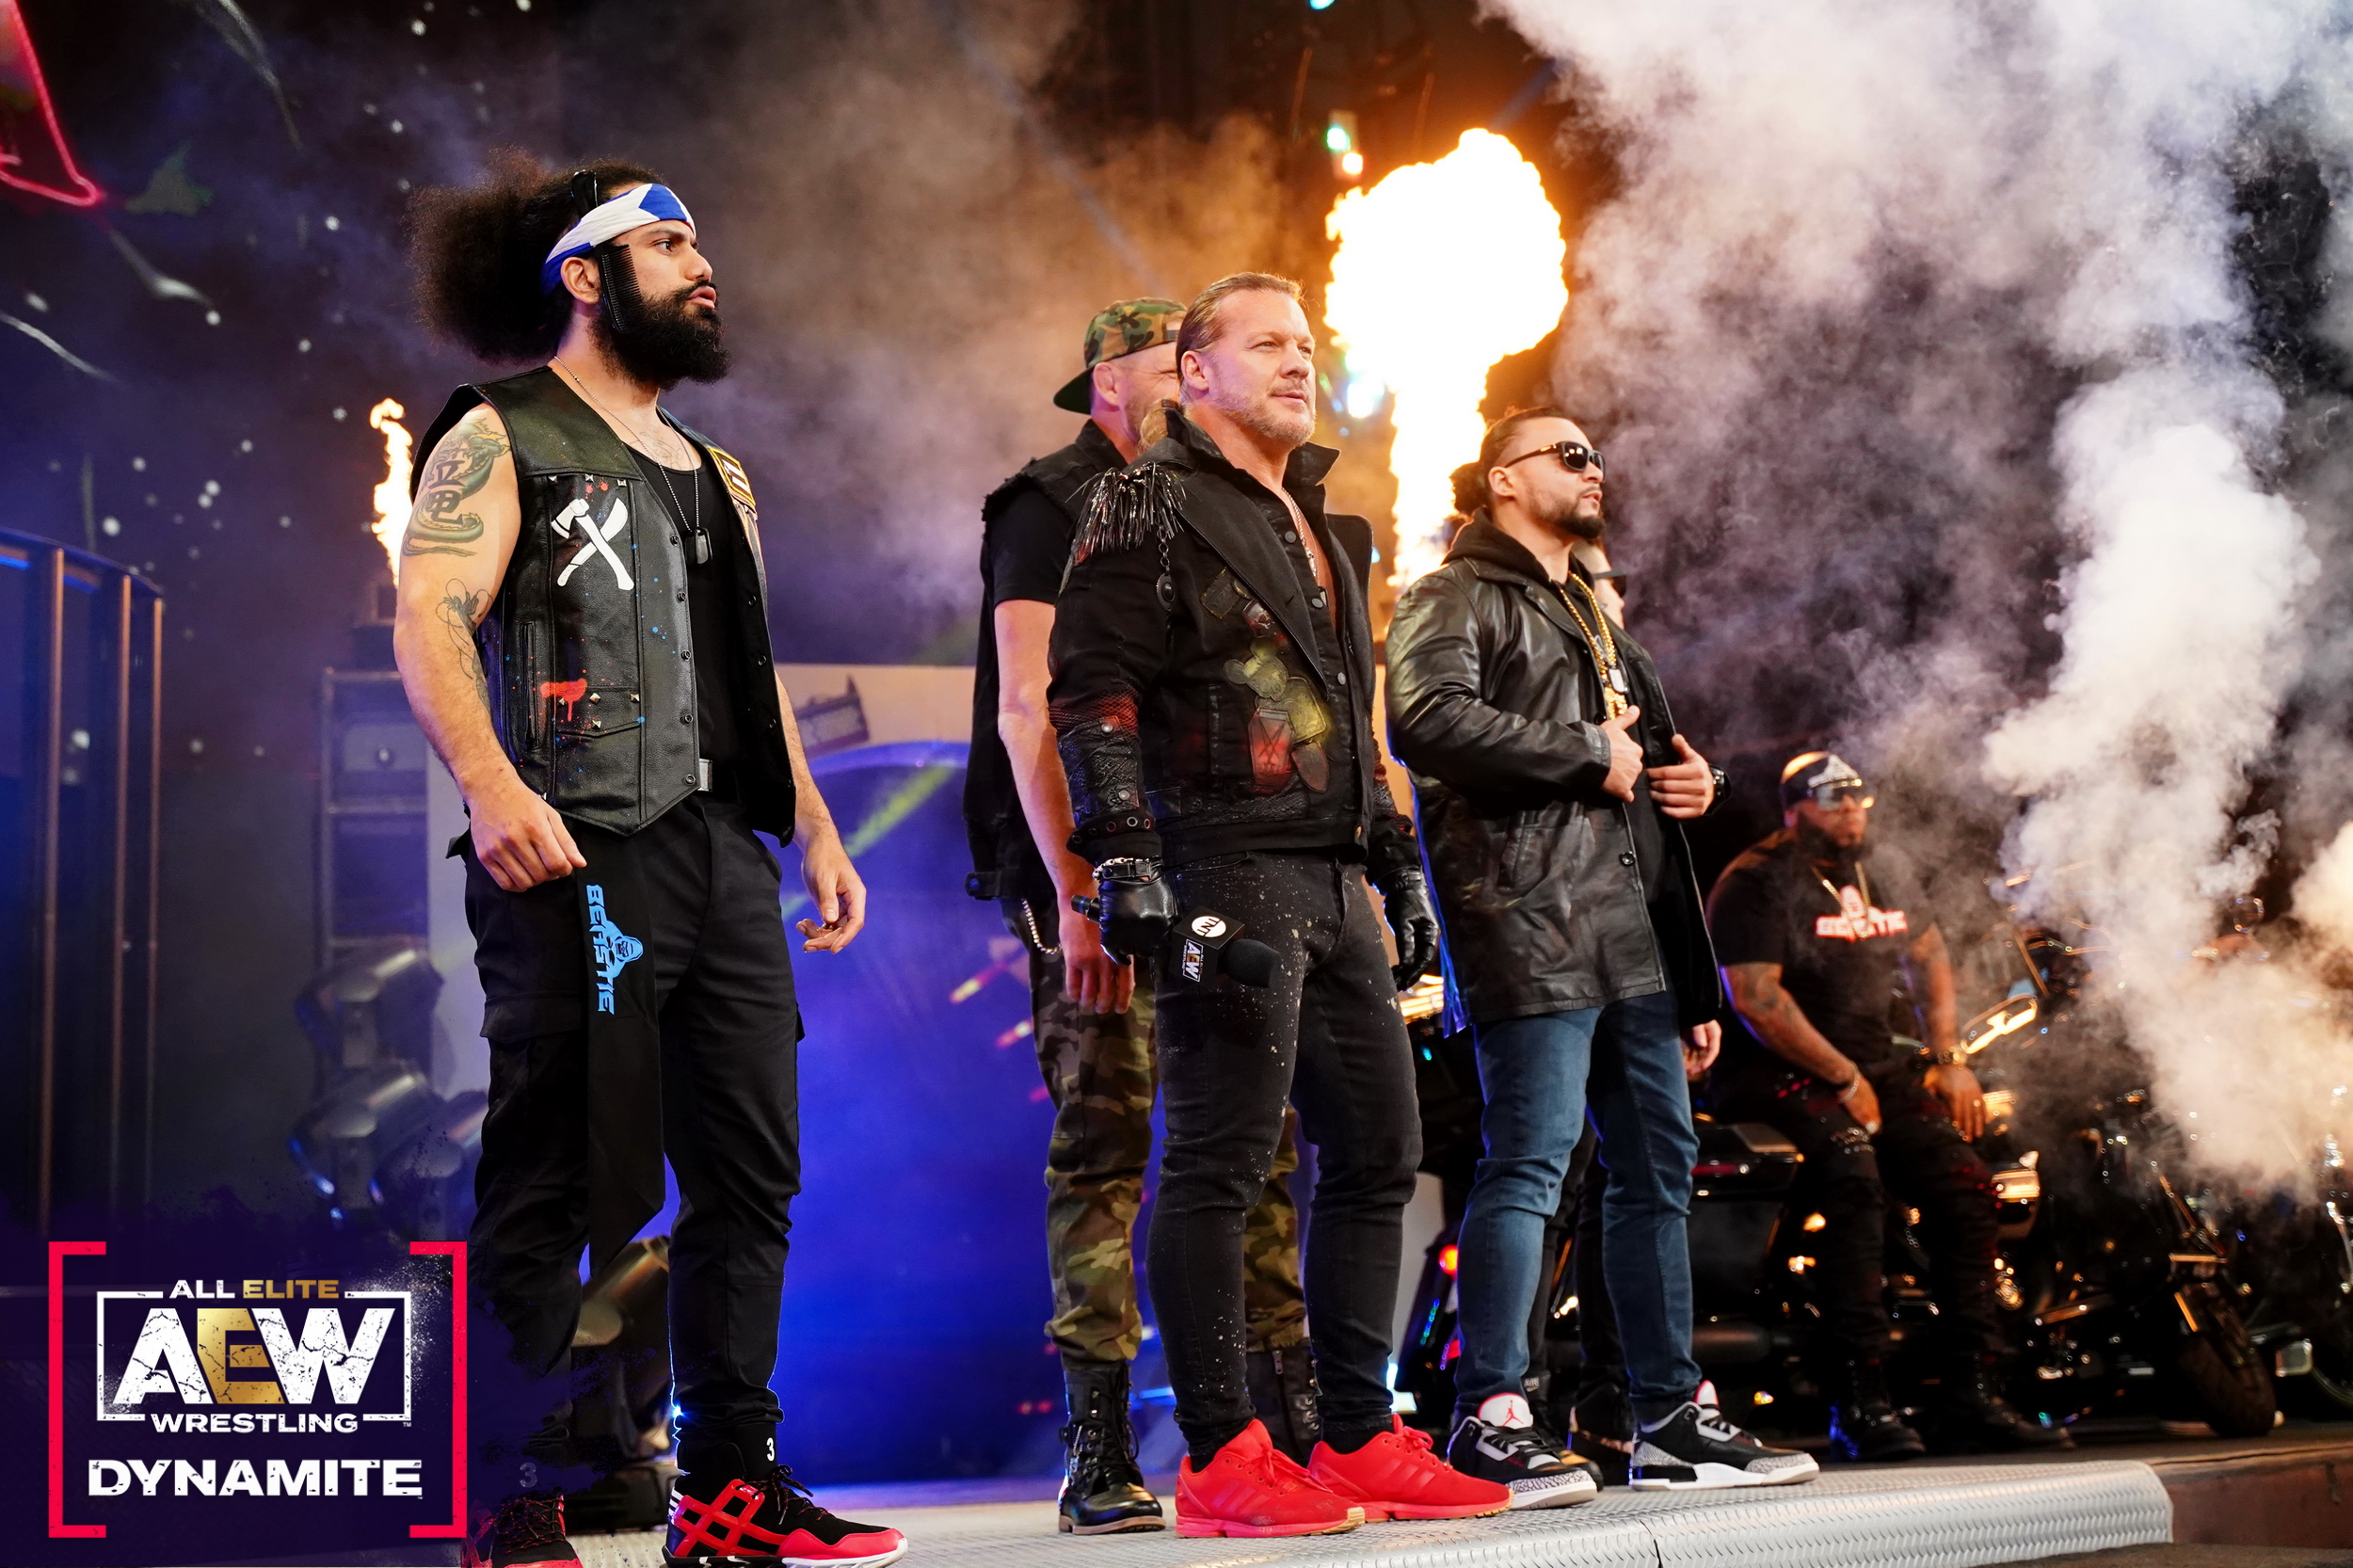 AEW Dynamite had a loaded show heading into ‘Blood & Guts’